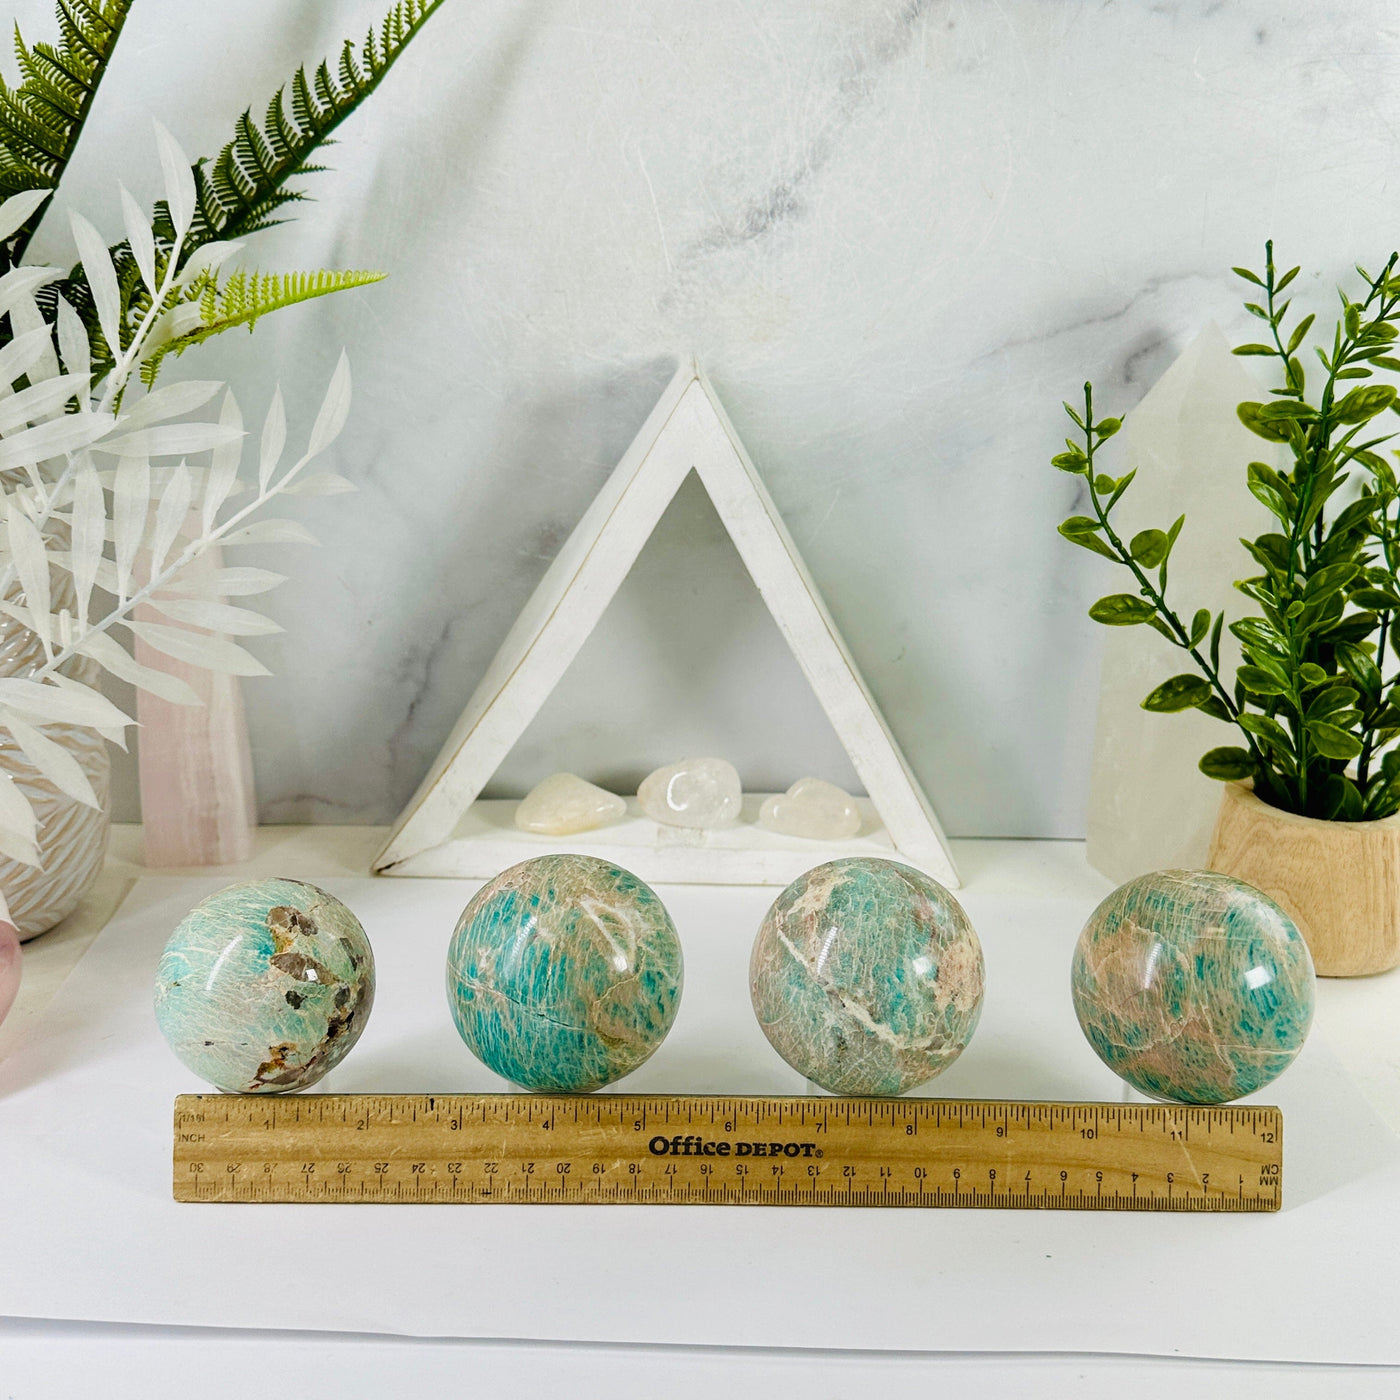 Amazonite Sphere - Crystal Ball - You Choose all variants with ruler for size reference